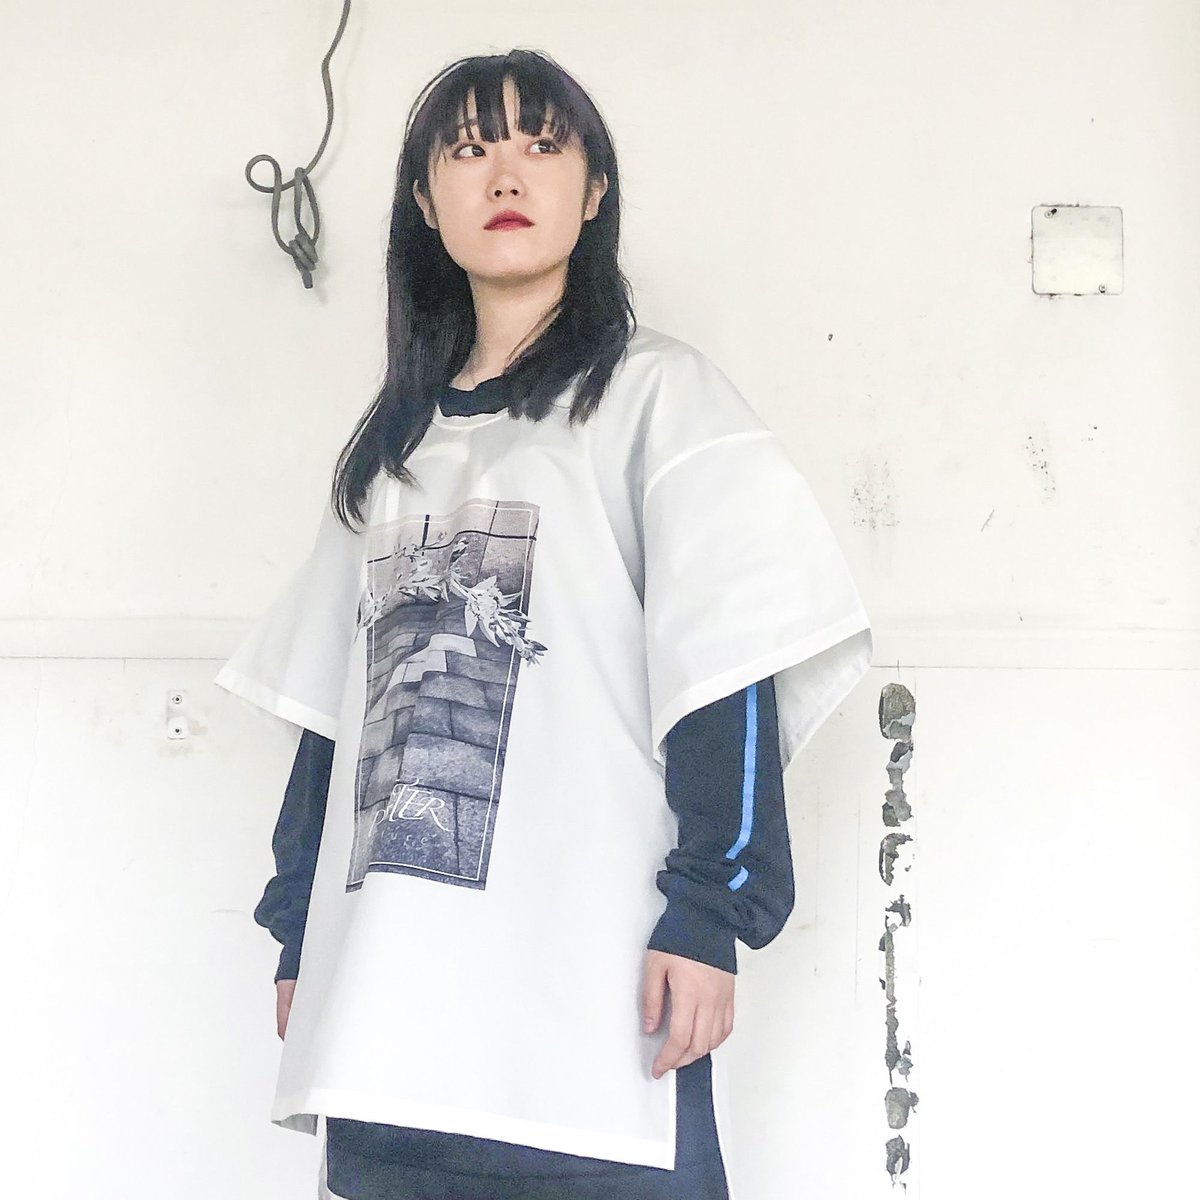 BALMUNG / グラフィックビッグT / POLYESTER / WHITE